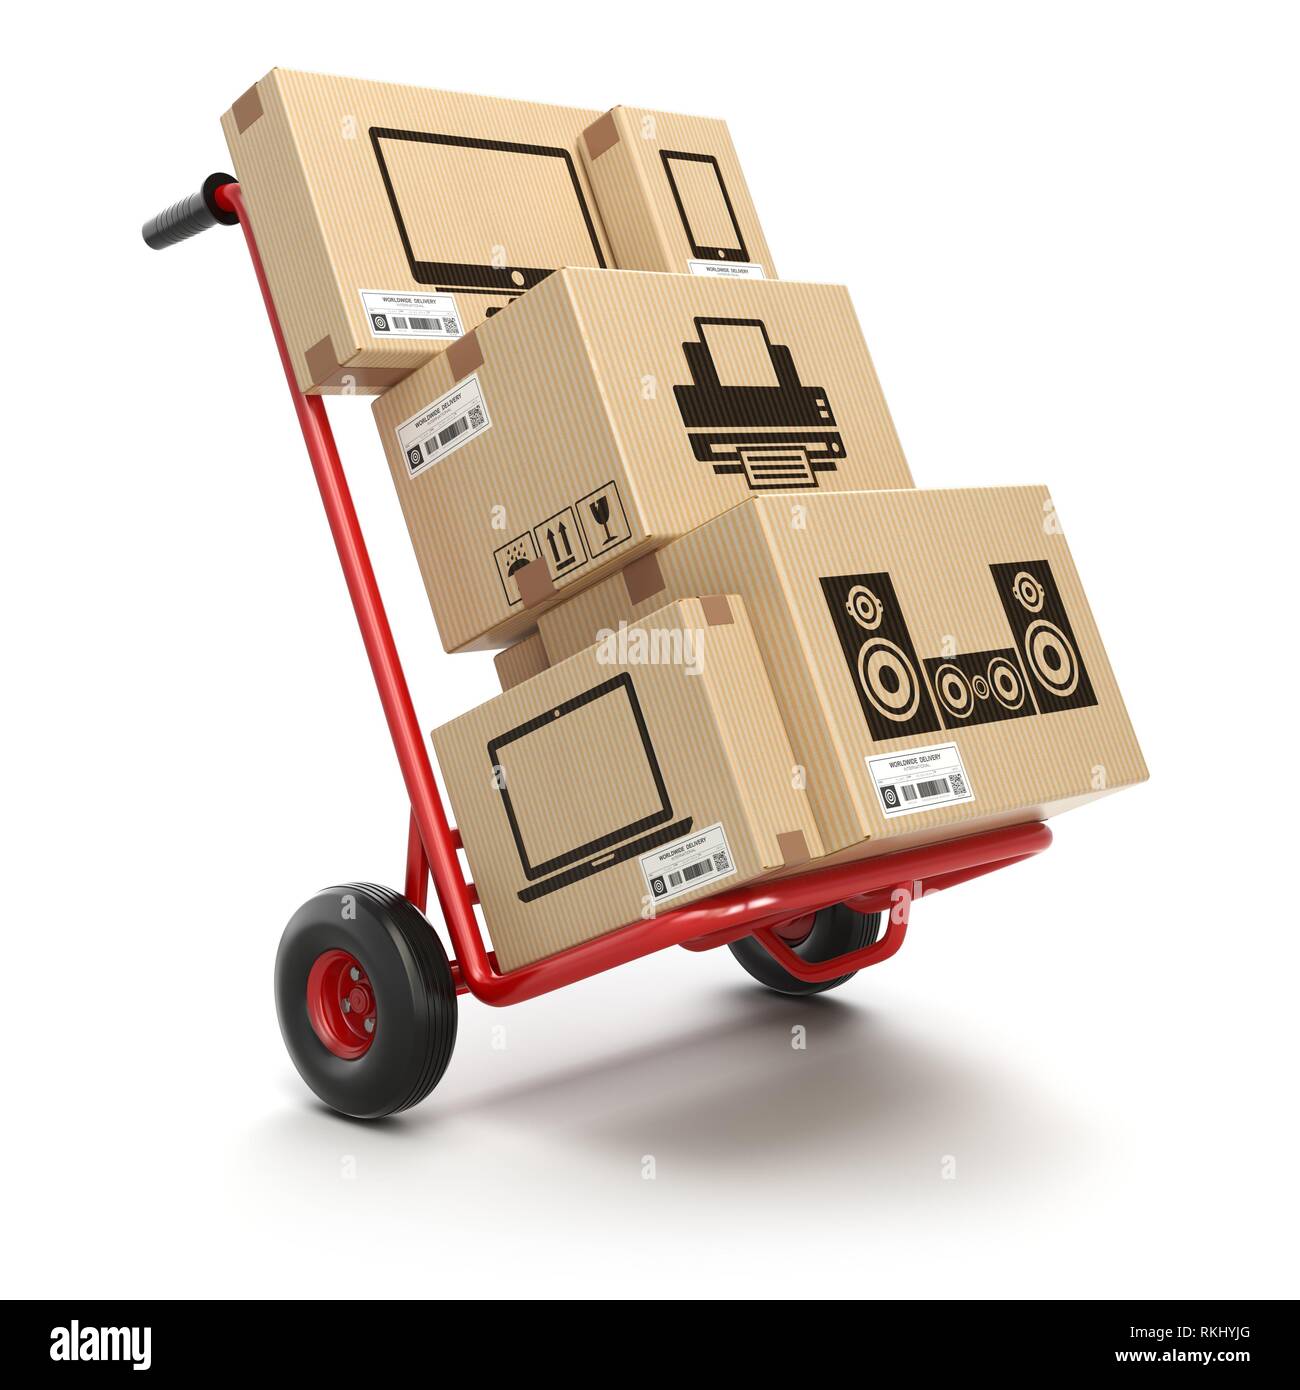 Sale and delivery of computer technics concept. Hand truck and cardboard boxes with PC, laptop, computer monitor and printer isoolated on white. 3d Stock Photo